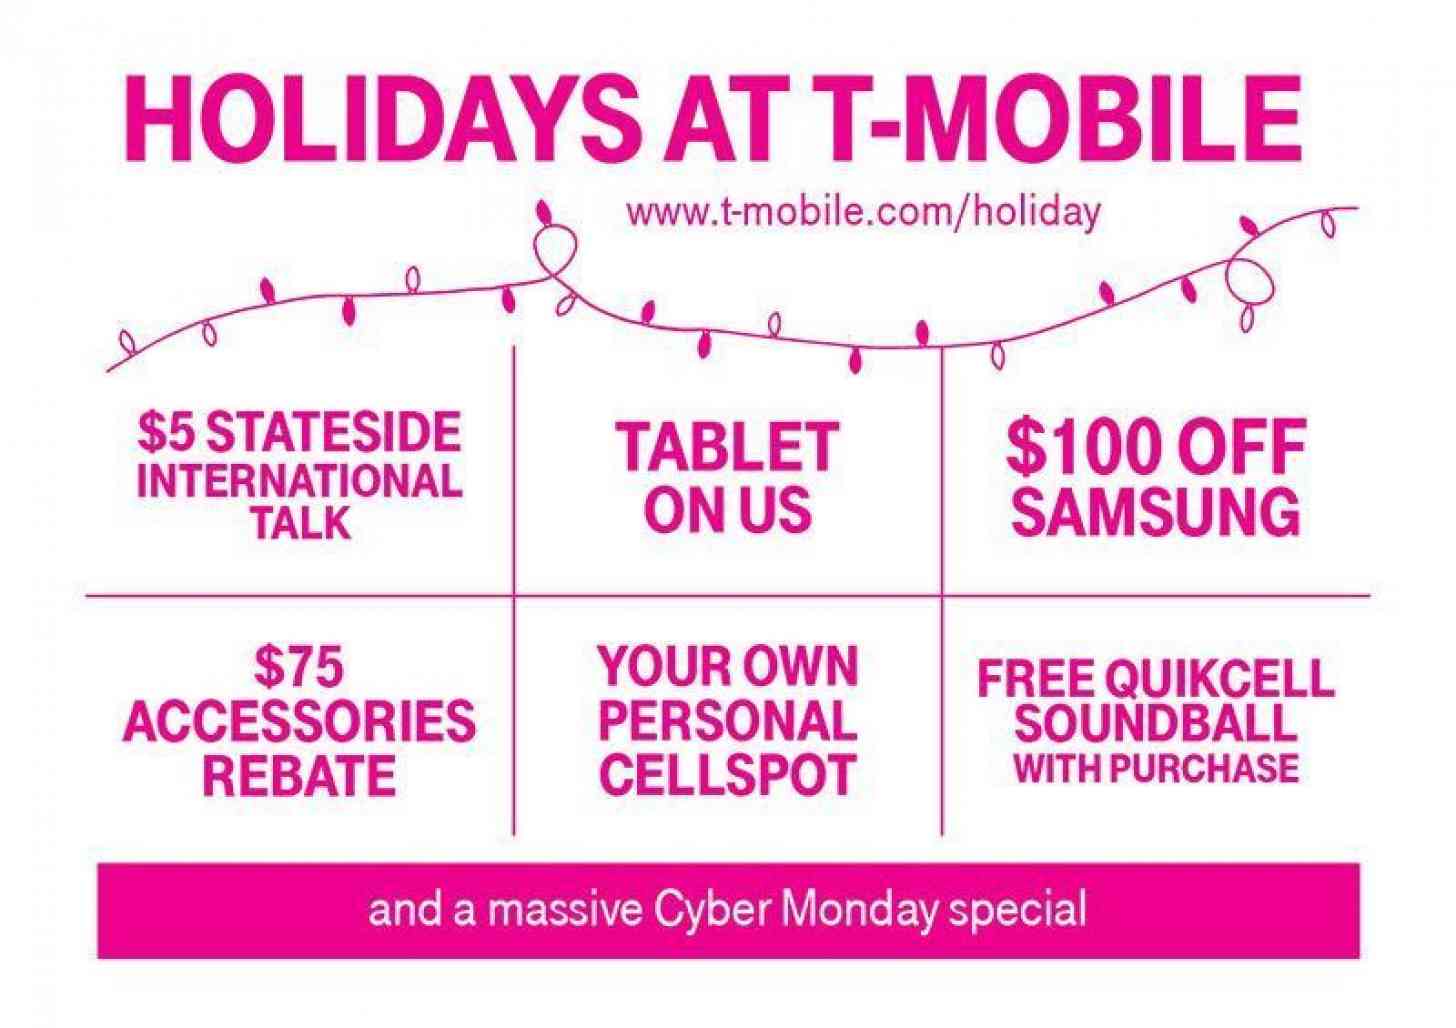 TMobile teases 'massive Cyber Monday special' News.Wirefly